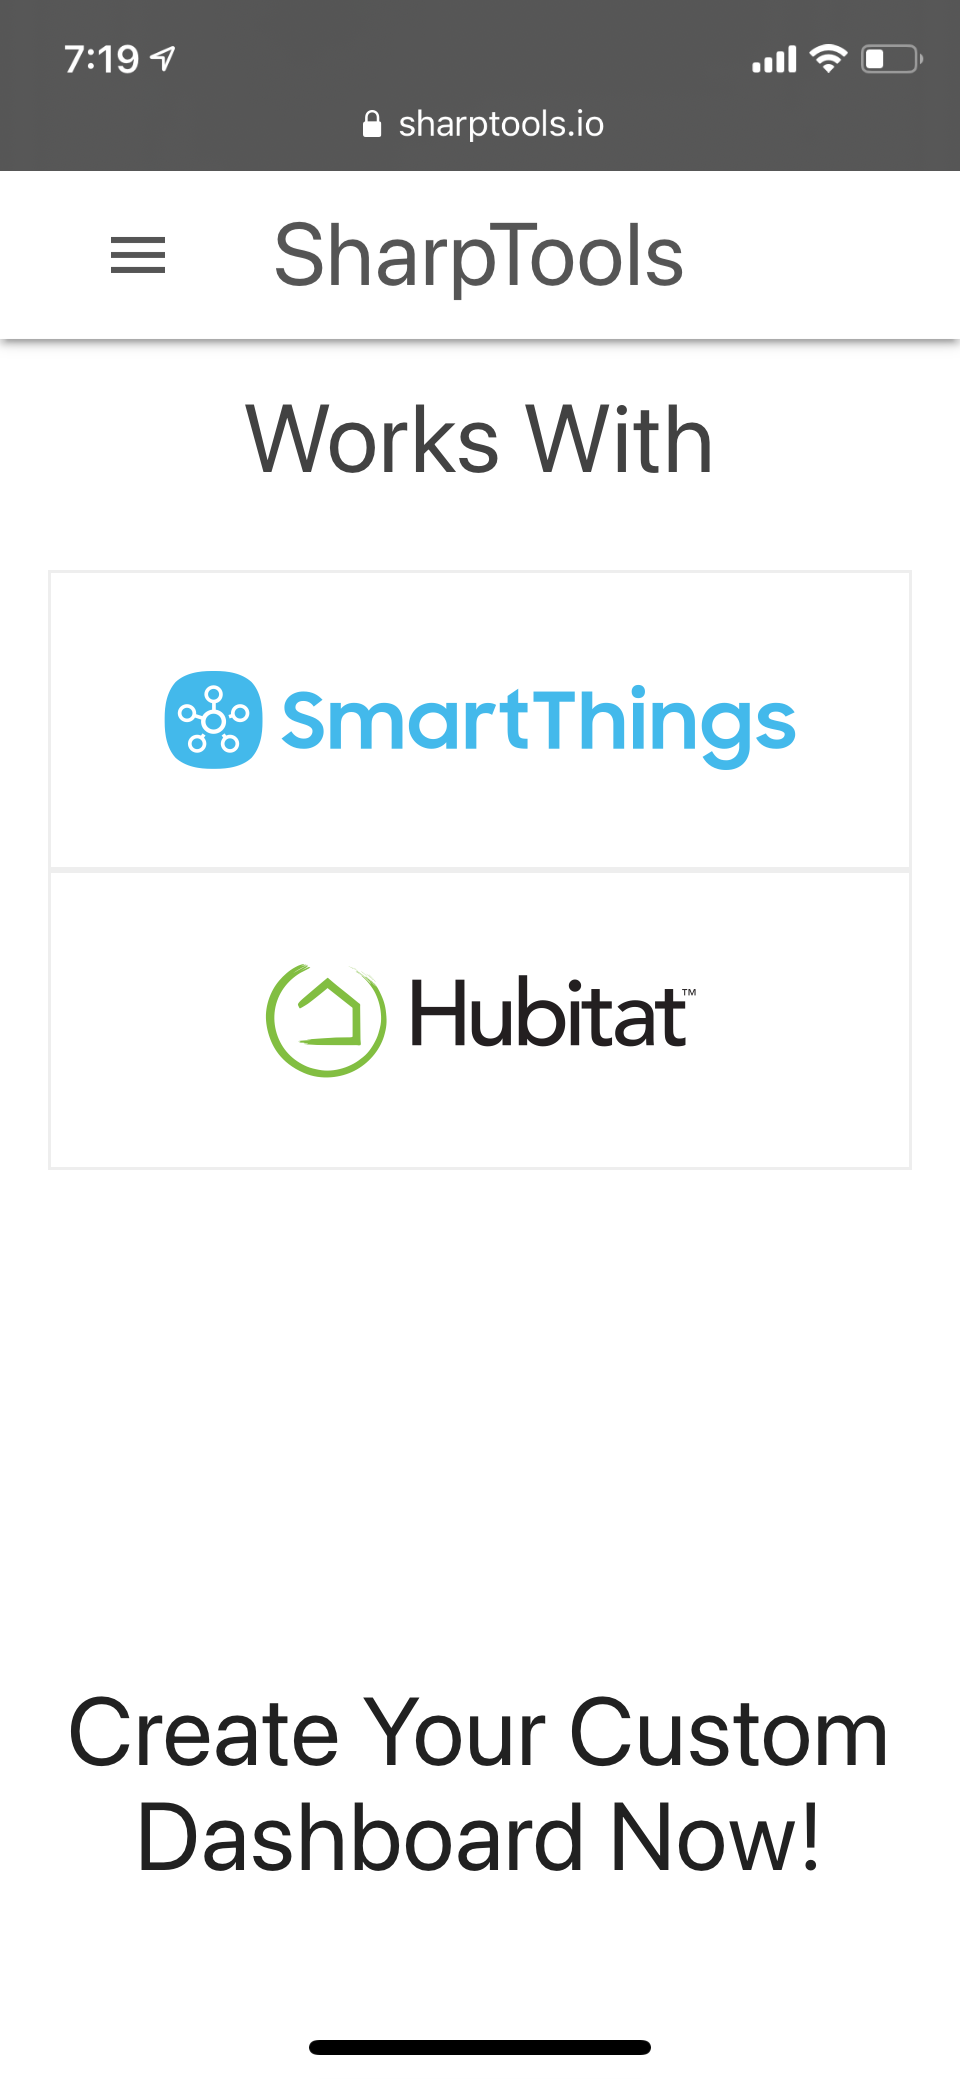 SharpTools Works With SmartThings Logo